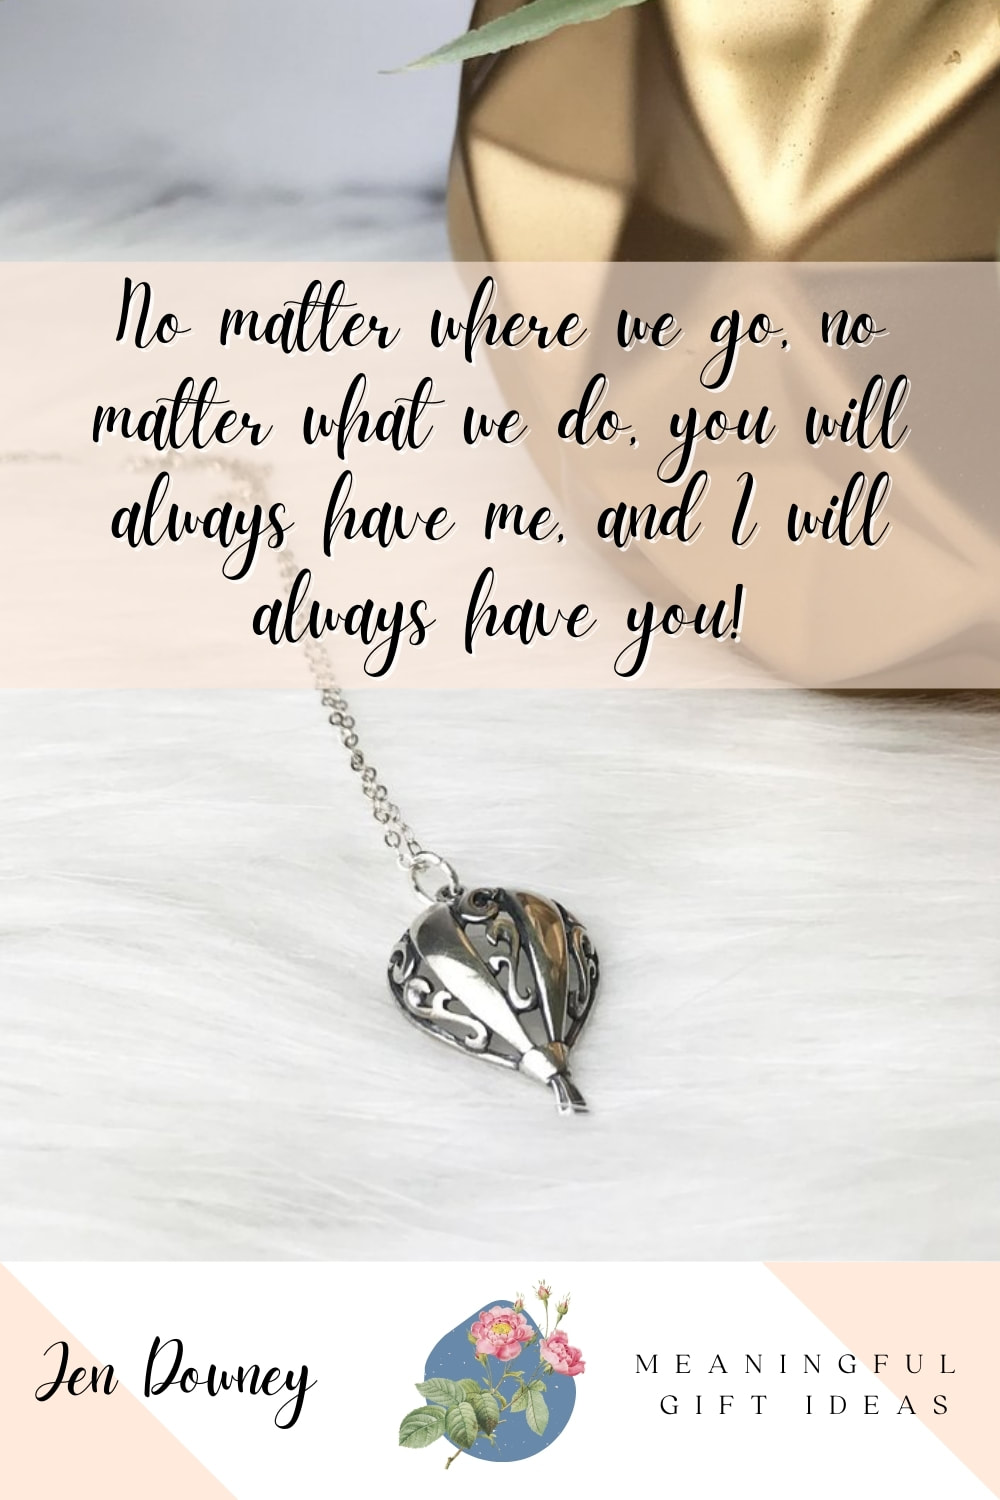 Friendship Quote Meaningful Gift Idea